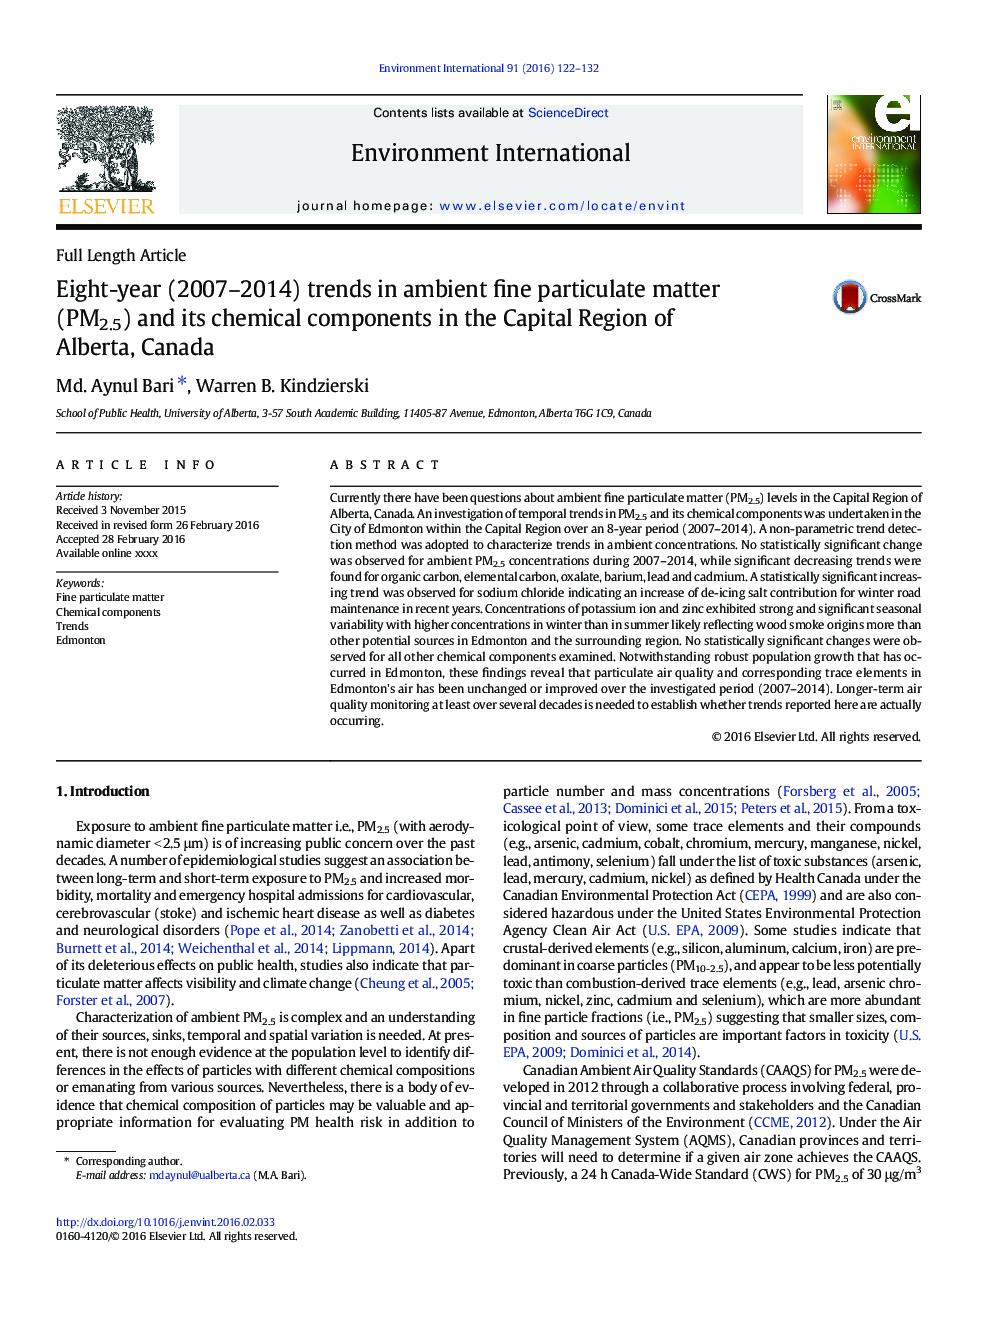 Eight-year (2007-2014) trends in ambient fine particulate matter (PM2.5) and its chemical components in the Capital Region of Alberta, Canada